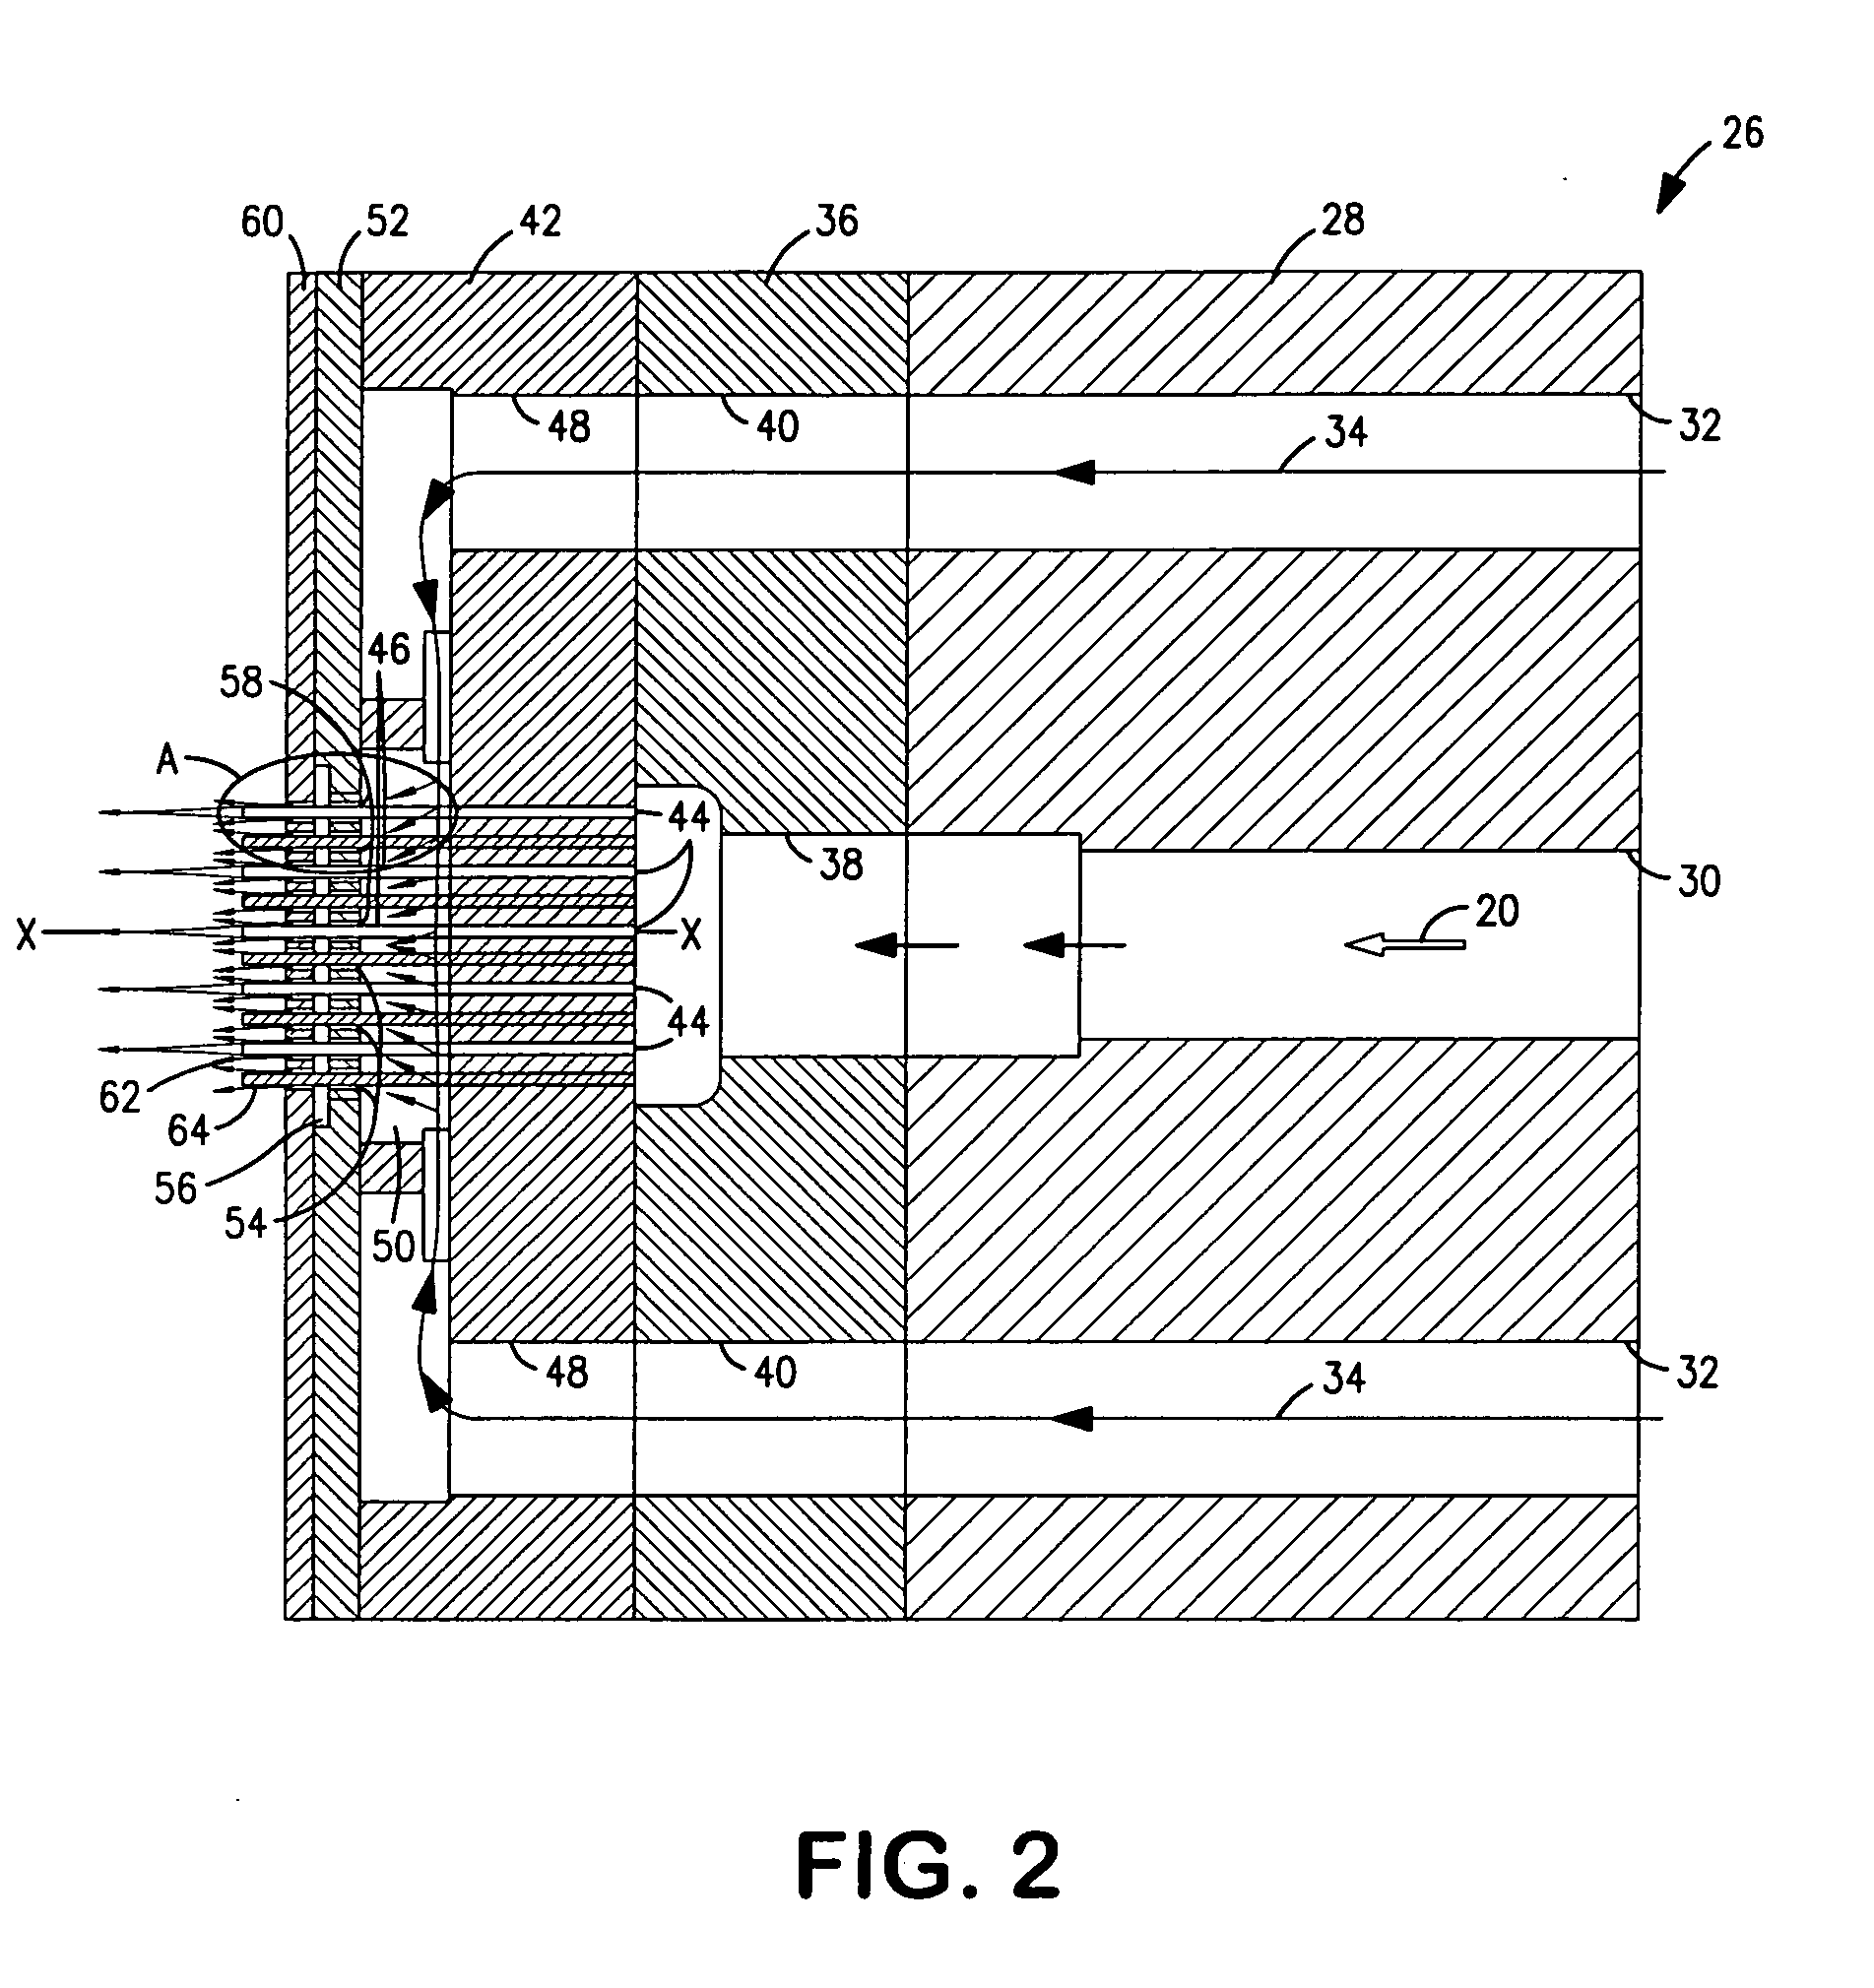 Array of nozzles for extruding multiple cellulose fibers